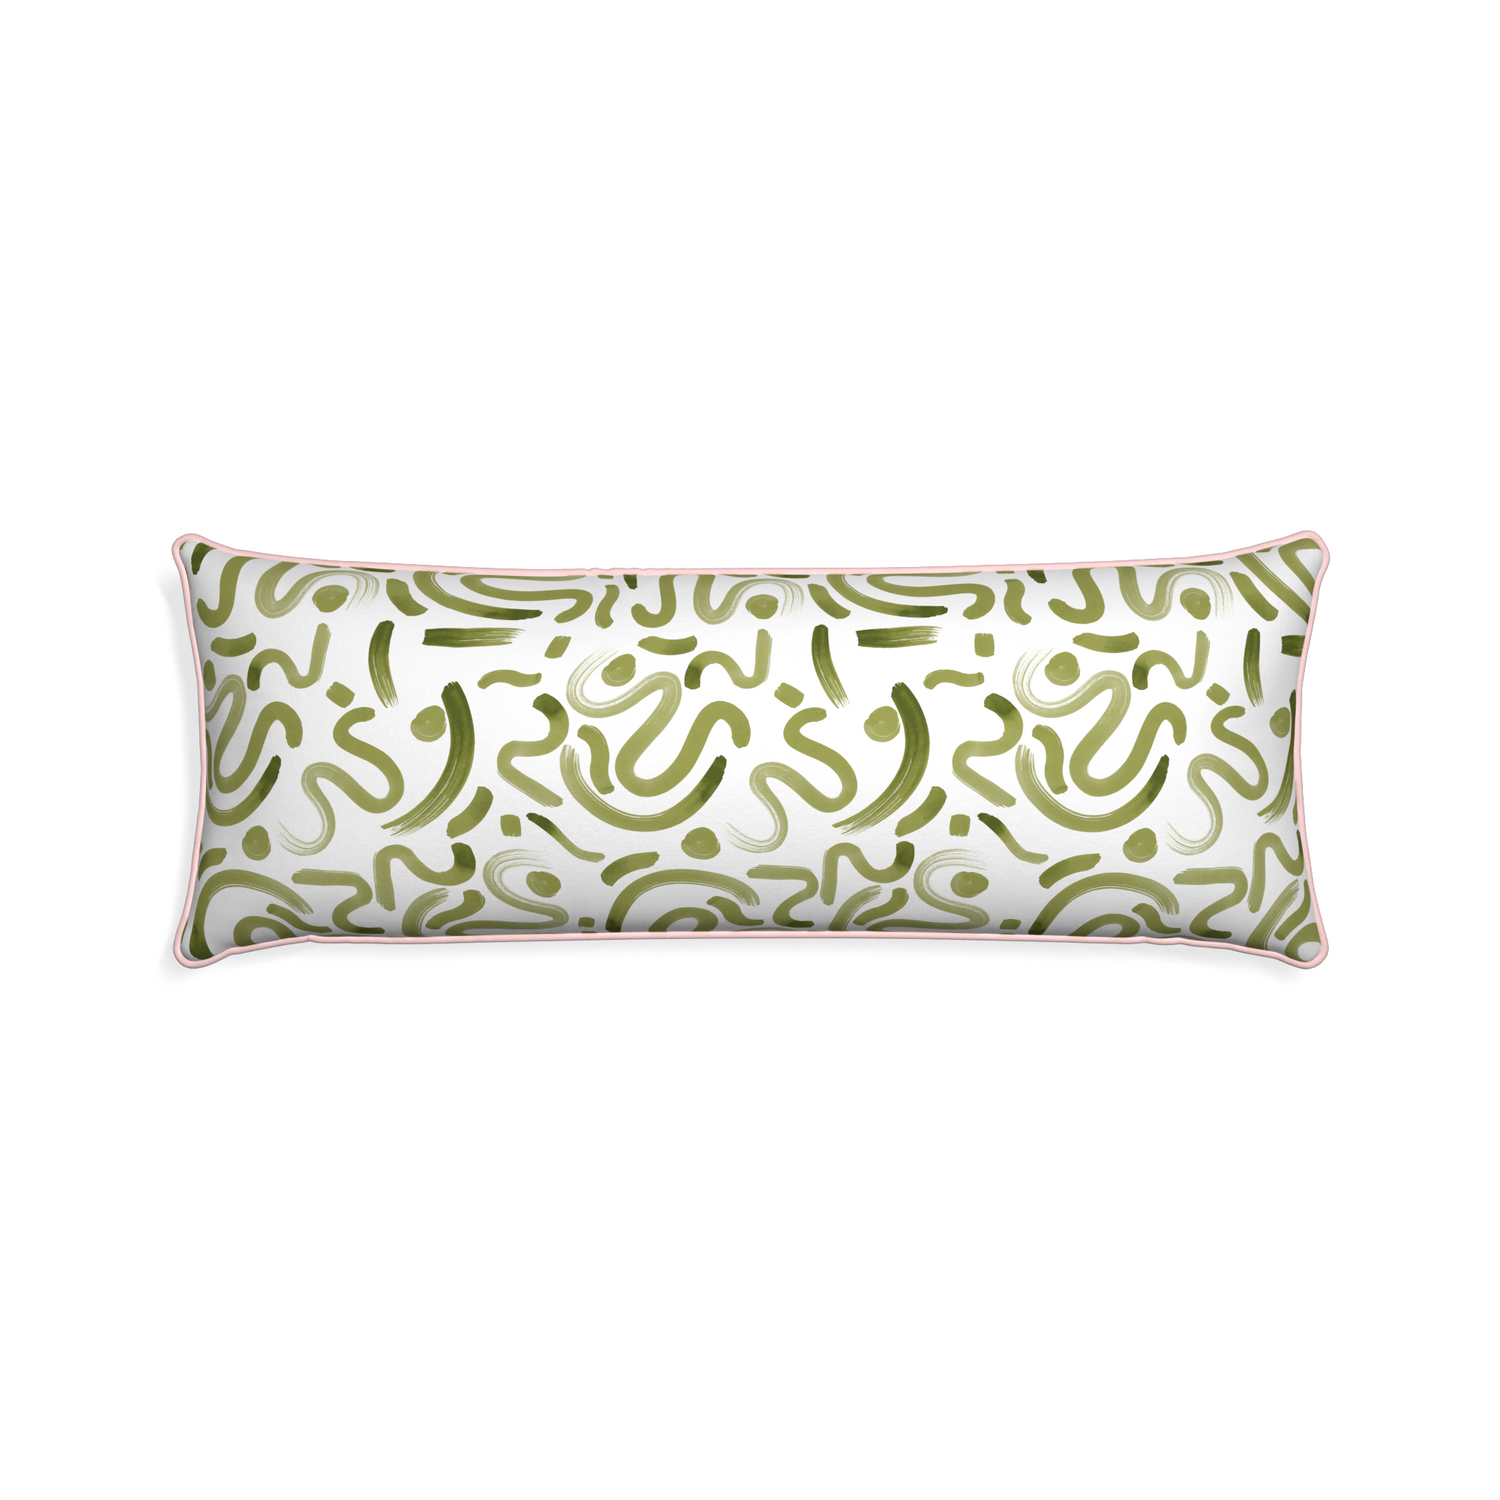 Xl-lumbar hockney moss custom moss greenpillow with petal piping on white background